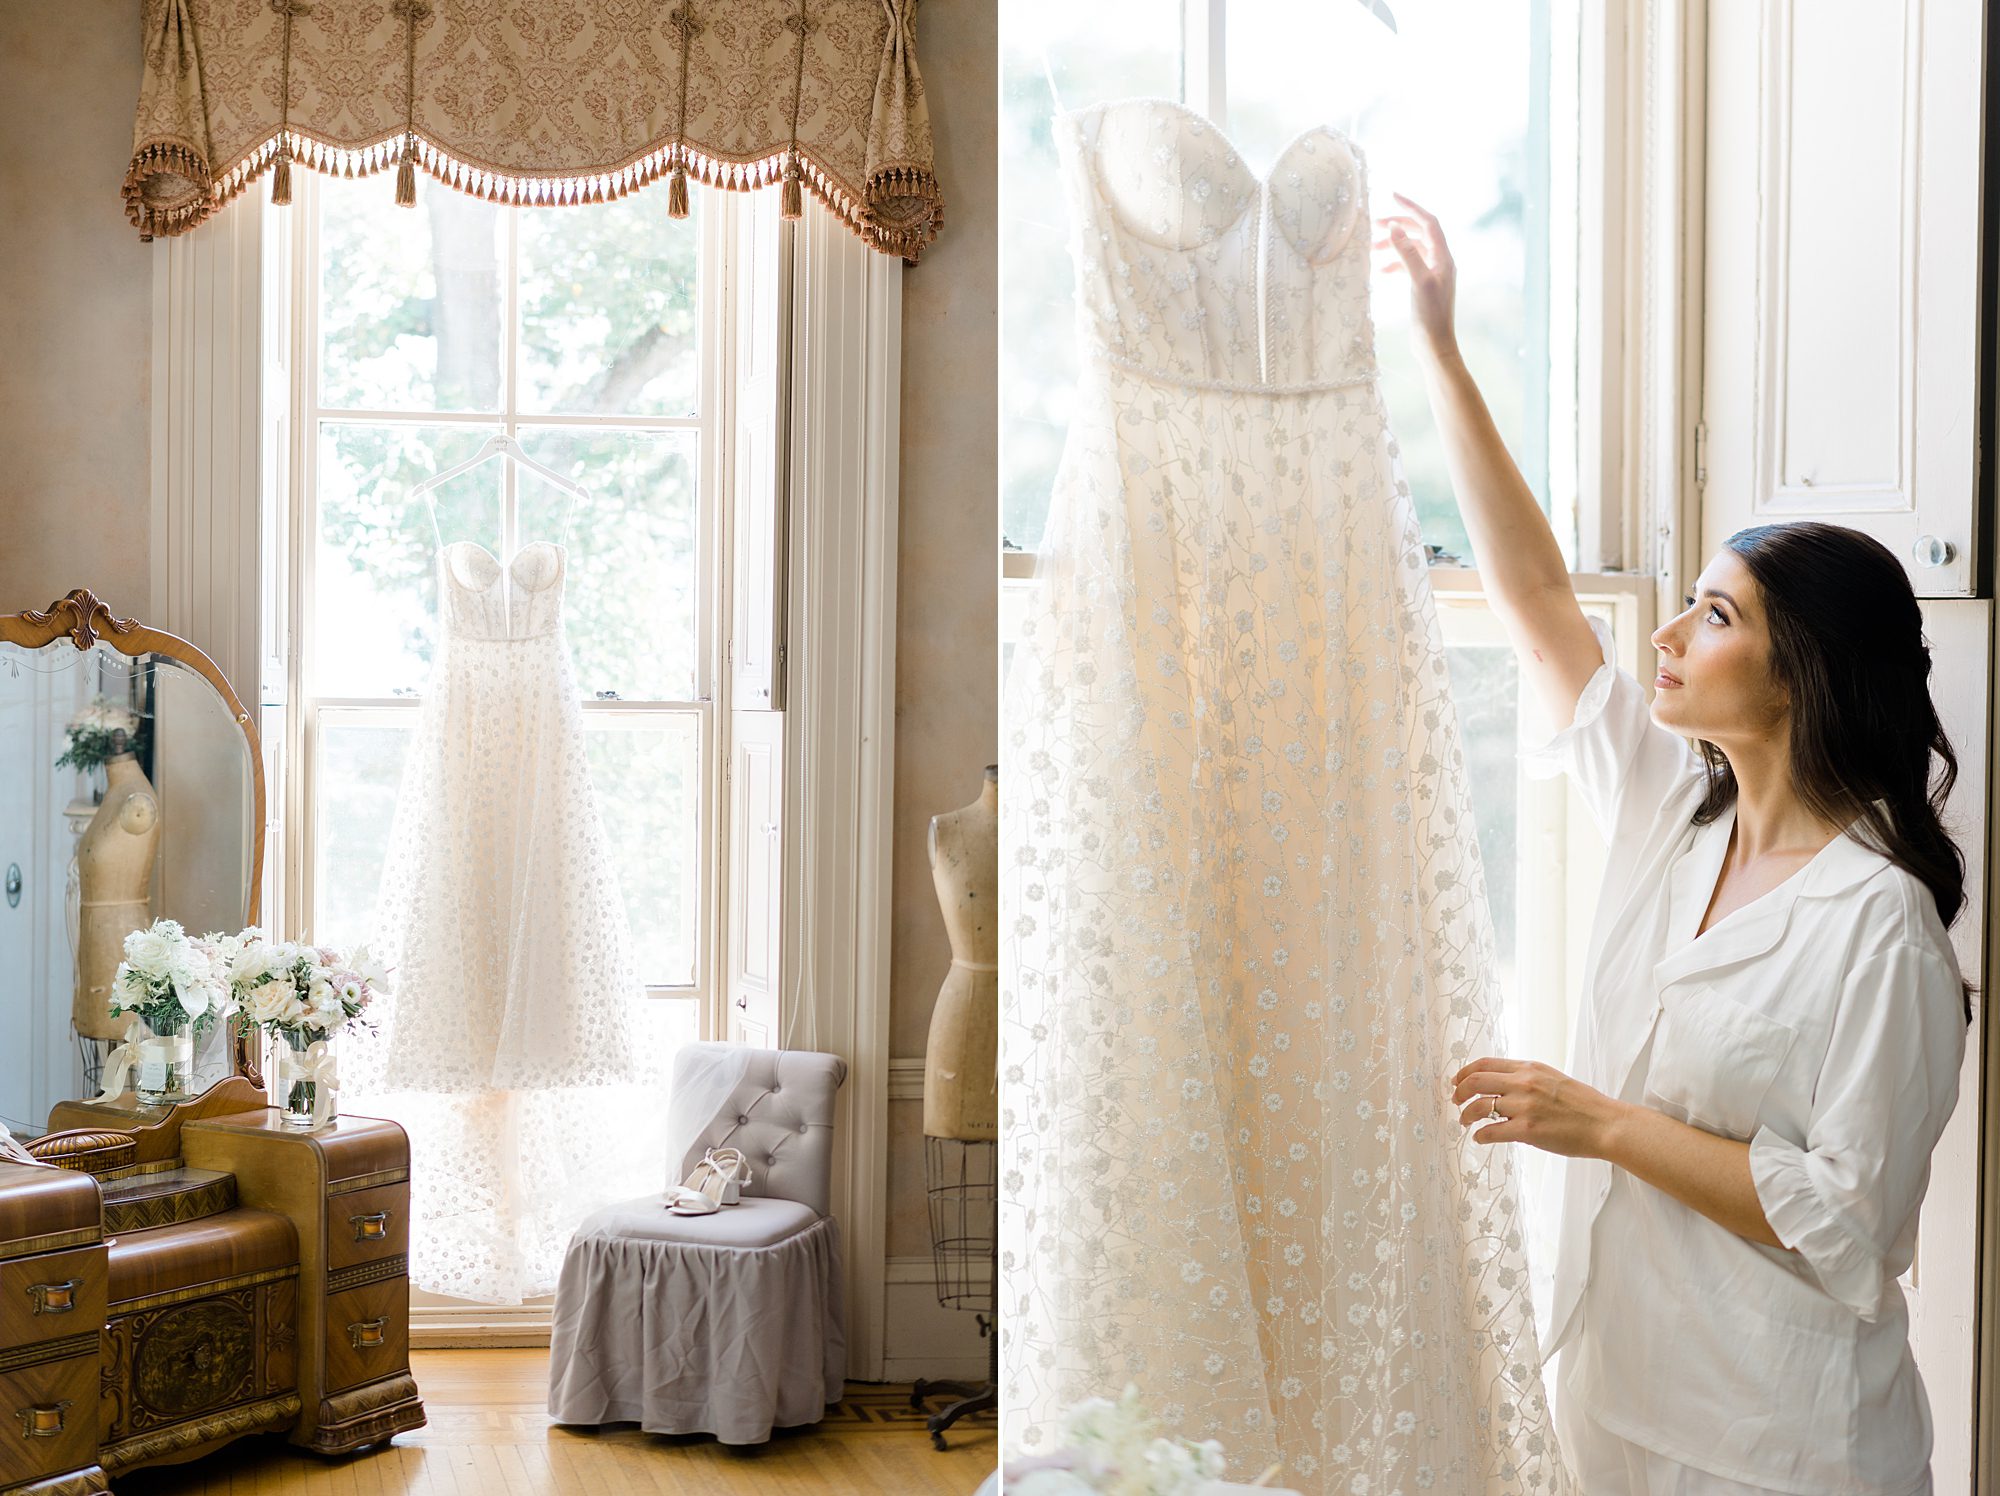 wedding dress hanging from window in bridal suite